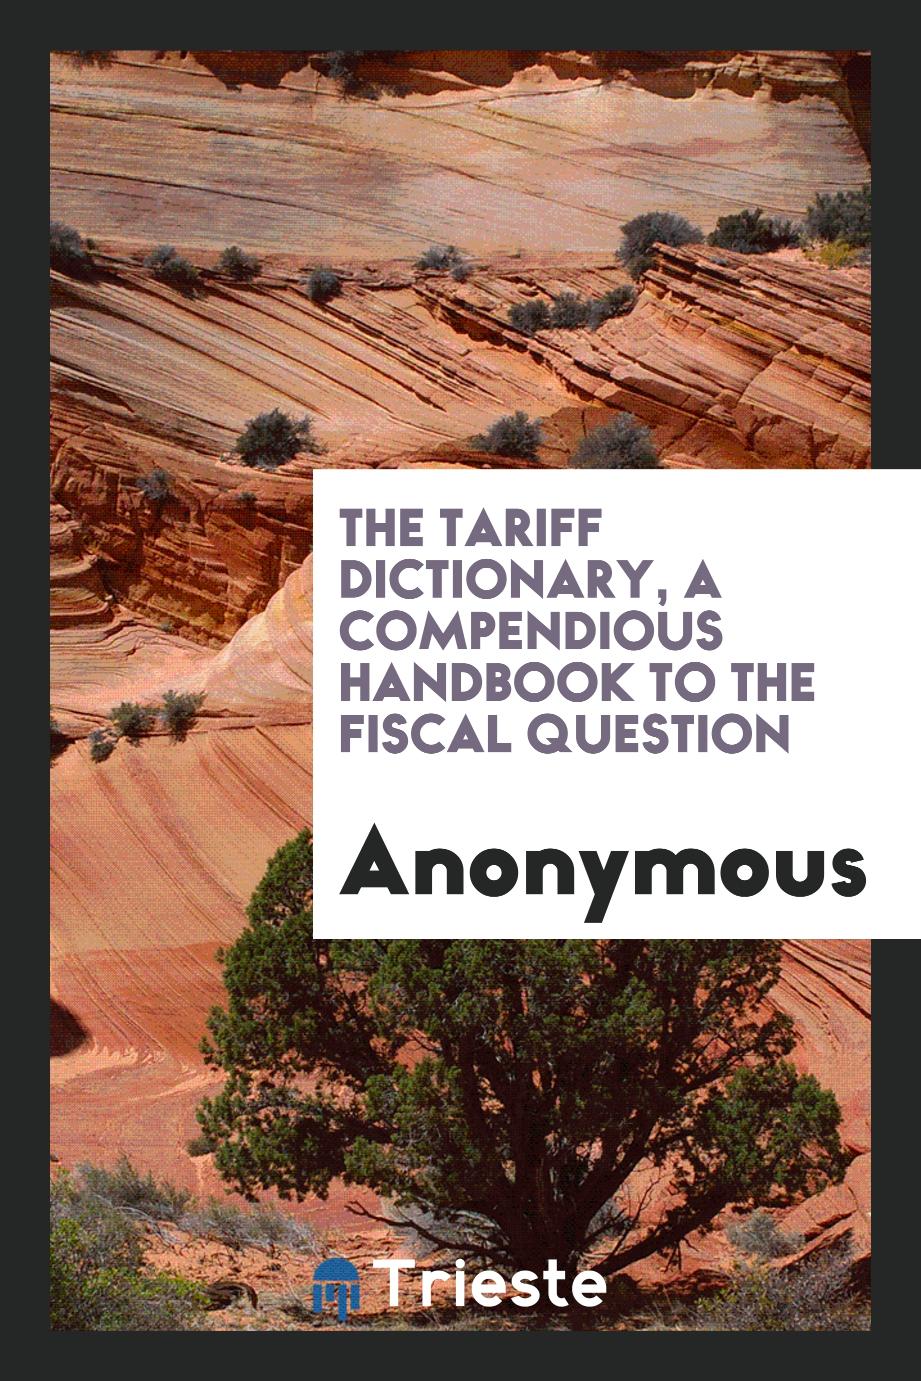 The tariff dictionary, a compendious handbook to the fiscal question